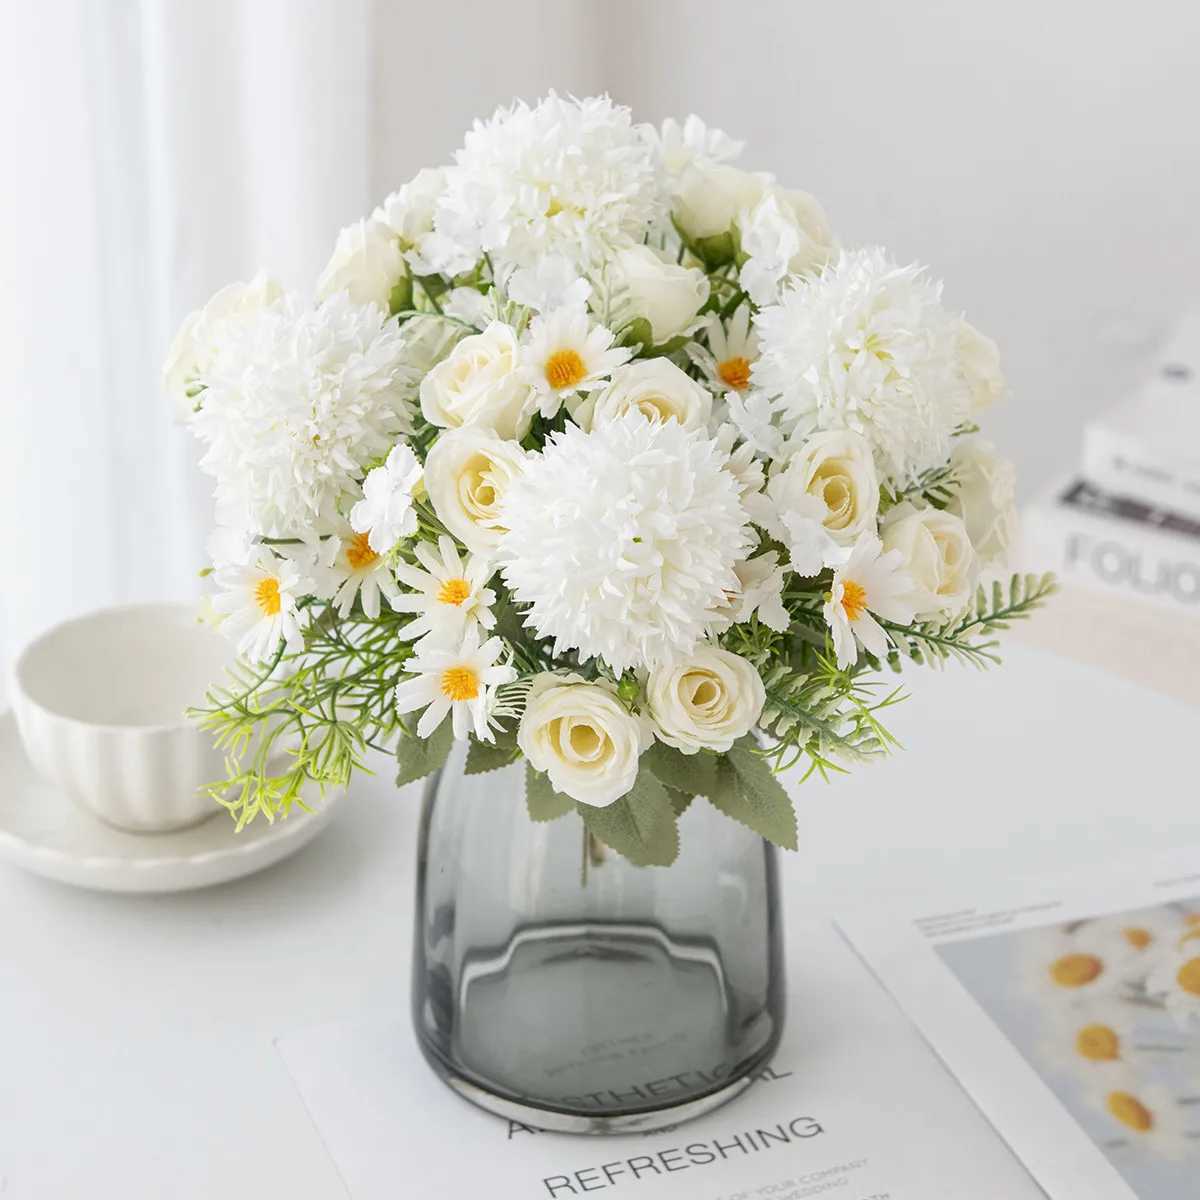 Decorative Flowers Wreaths Hot sales Rose chrysanthemum Silk Bouquet Artificial Flowers For Wedding Home vase Christmas Wreath wall Diy gift decoration